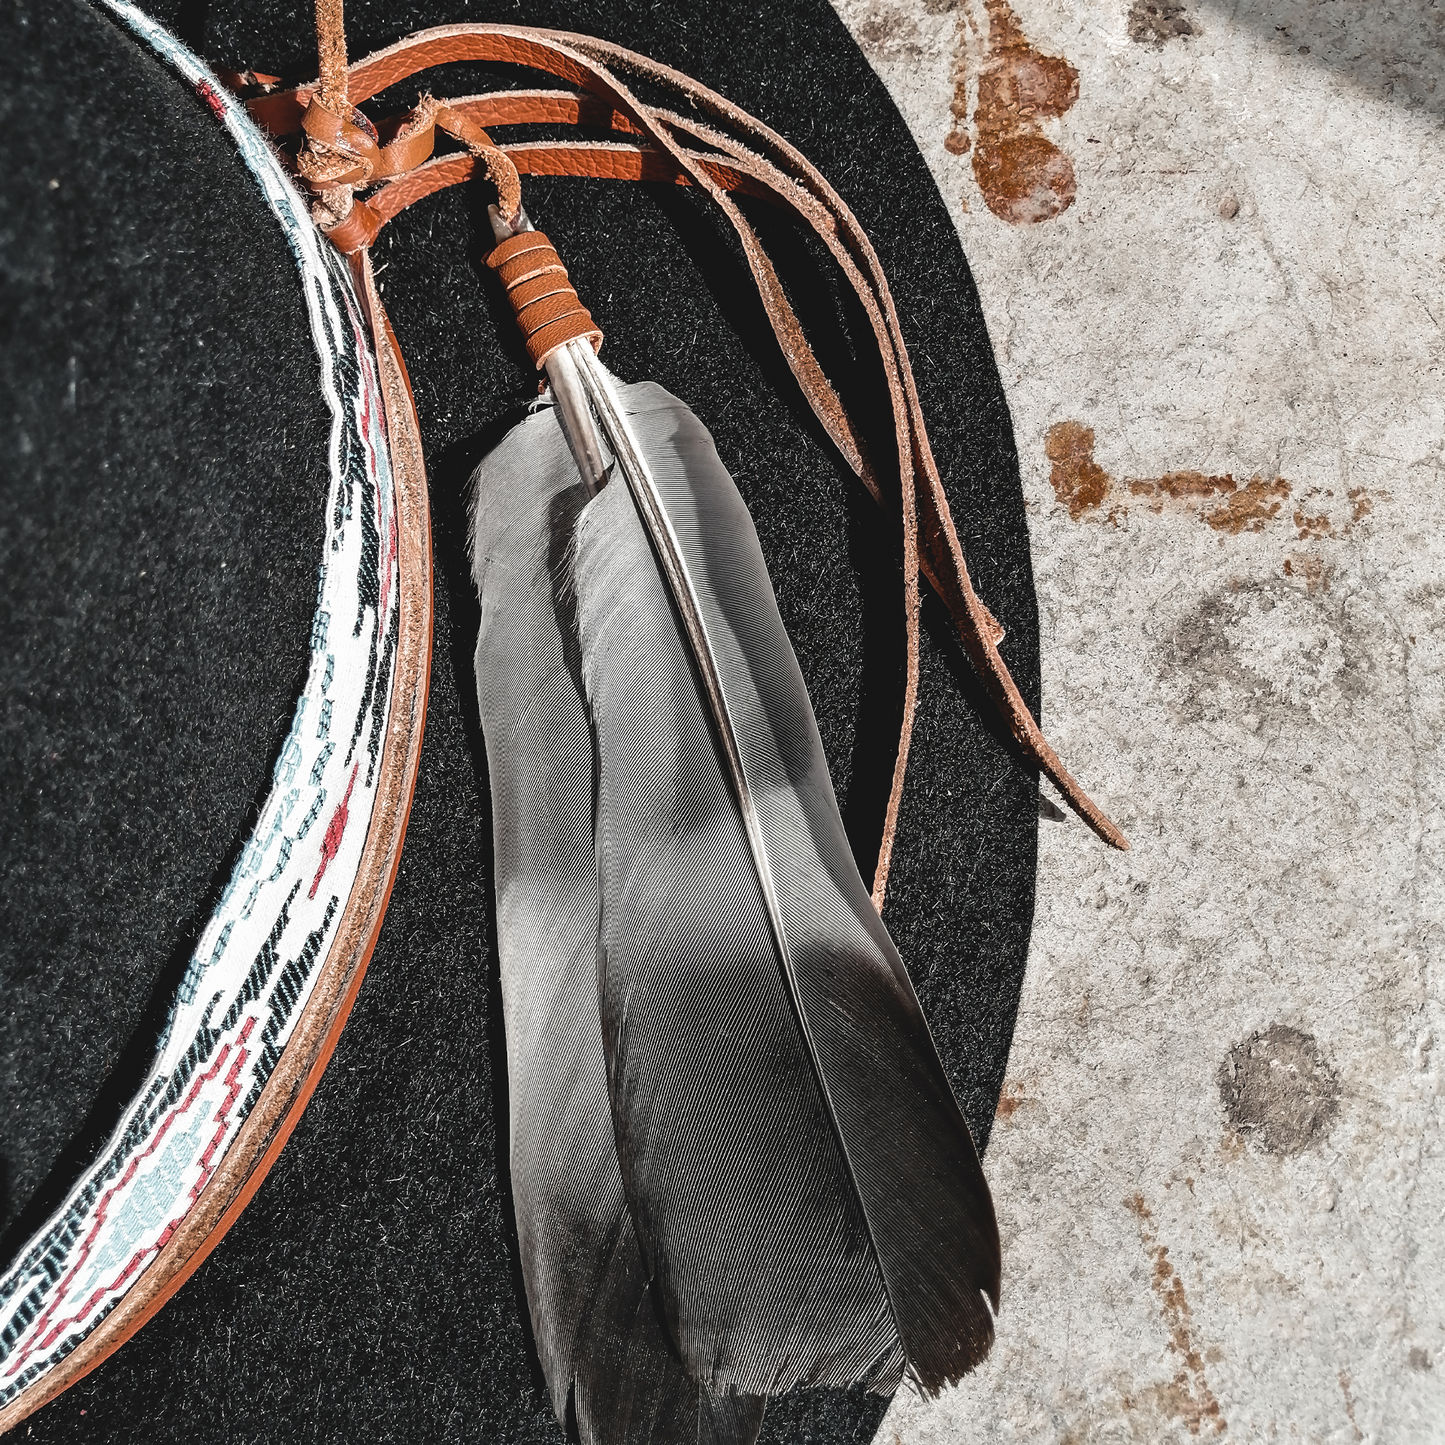 Sioux Feathers